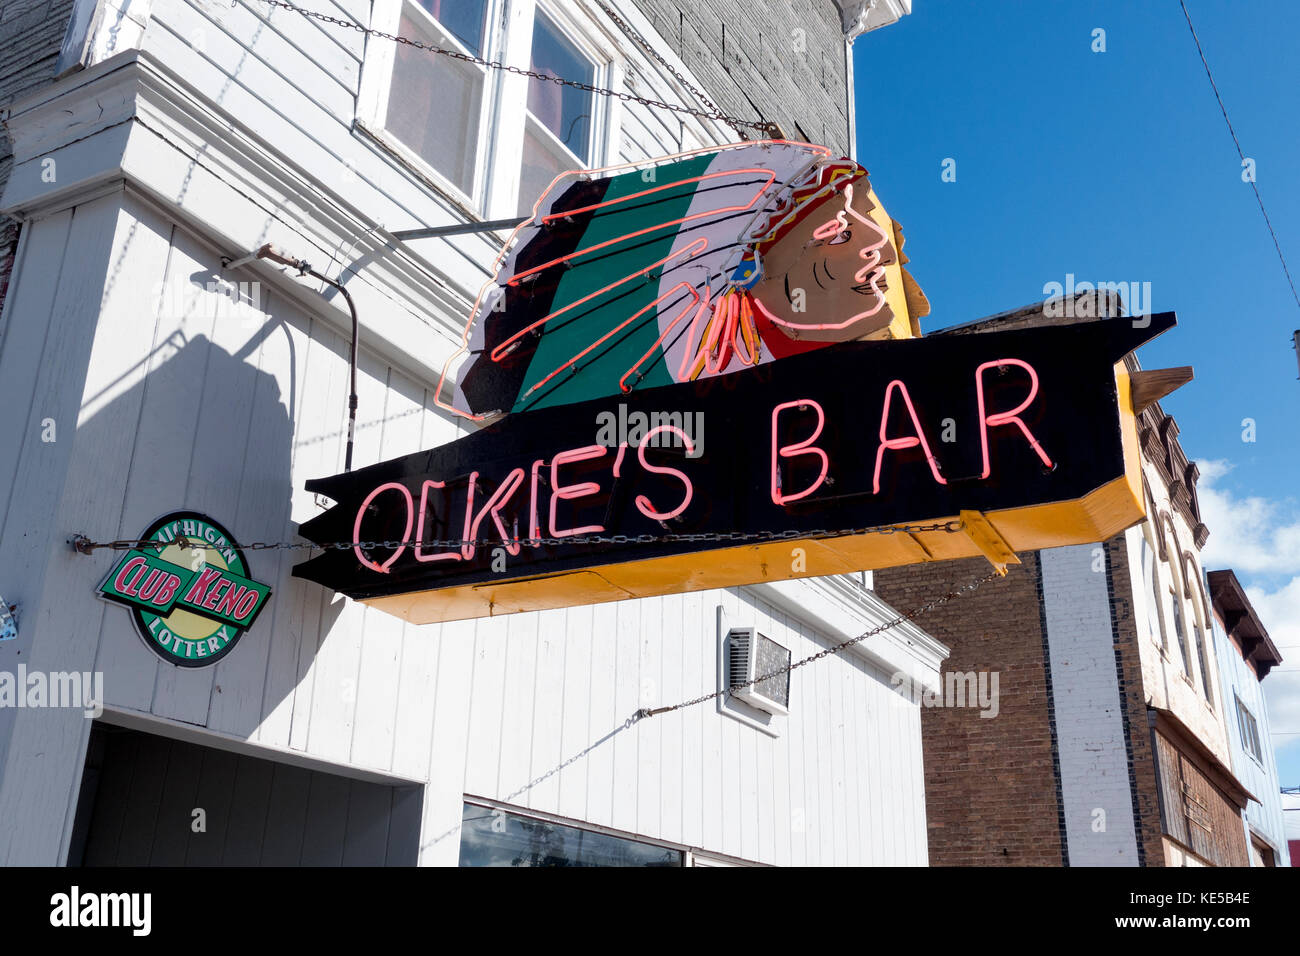 Neon sign of Hiawatha's head with full Native American headdress above the sign for Olkie's Bar. Ironwood Michigan MI USA Stock Photo